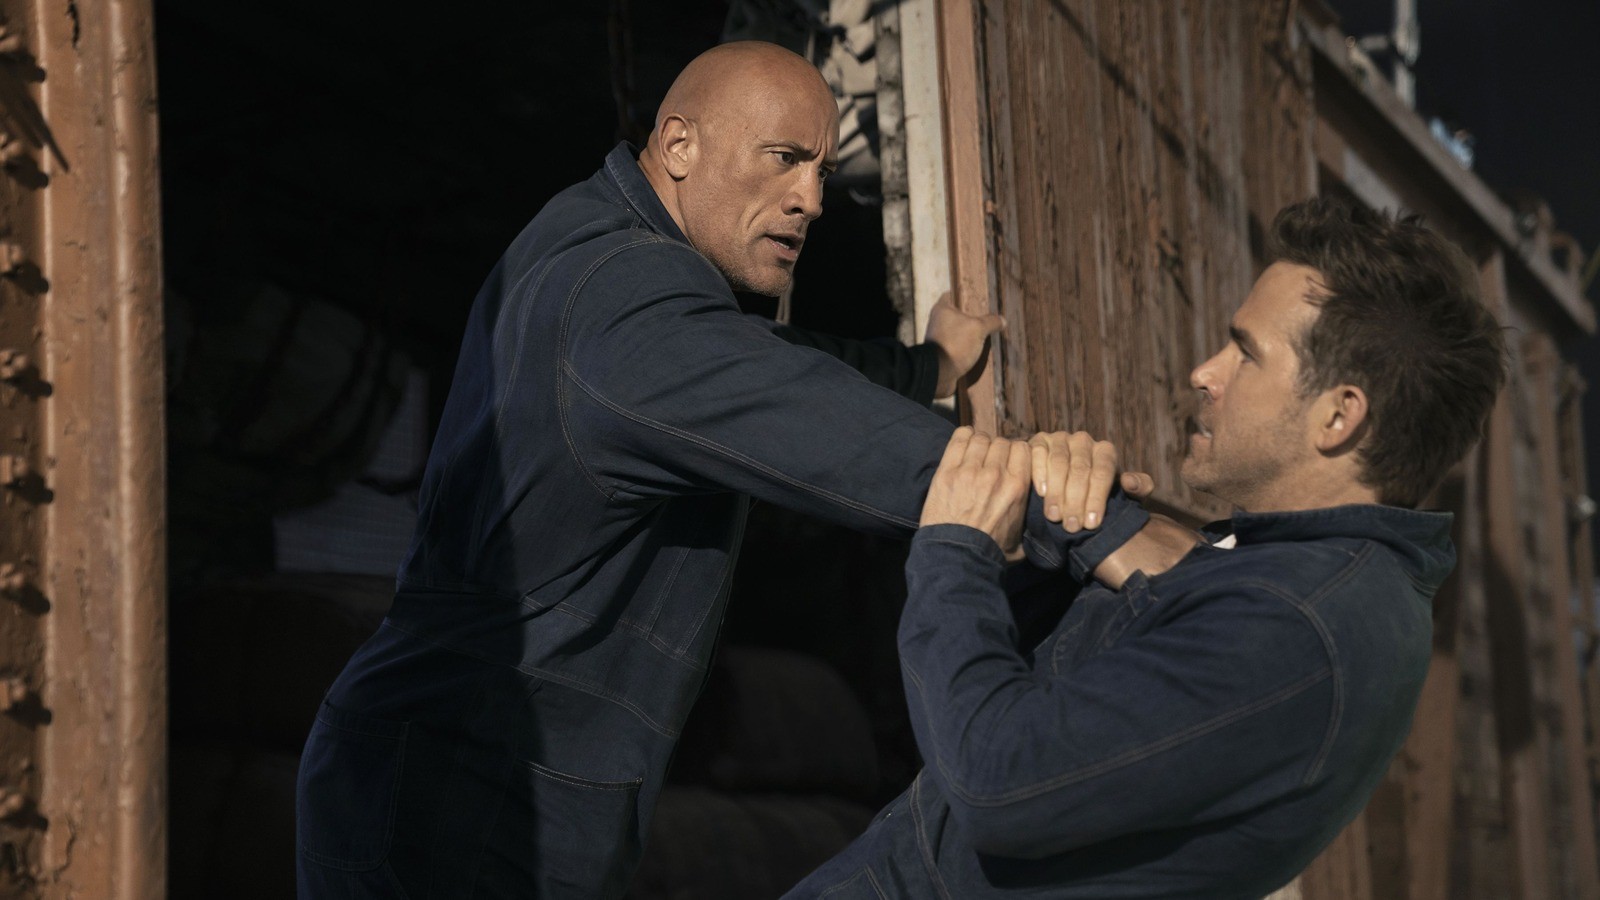 Dwayne Johnson and Ryan Reynolds have a tussle in Red Notice